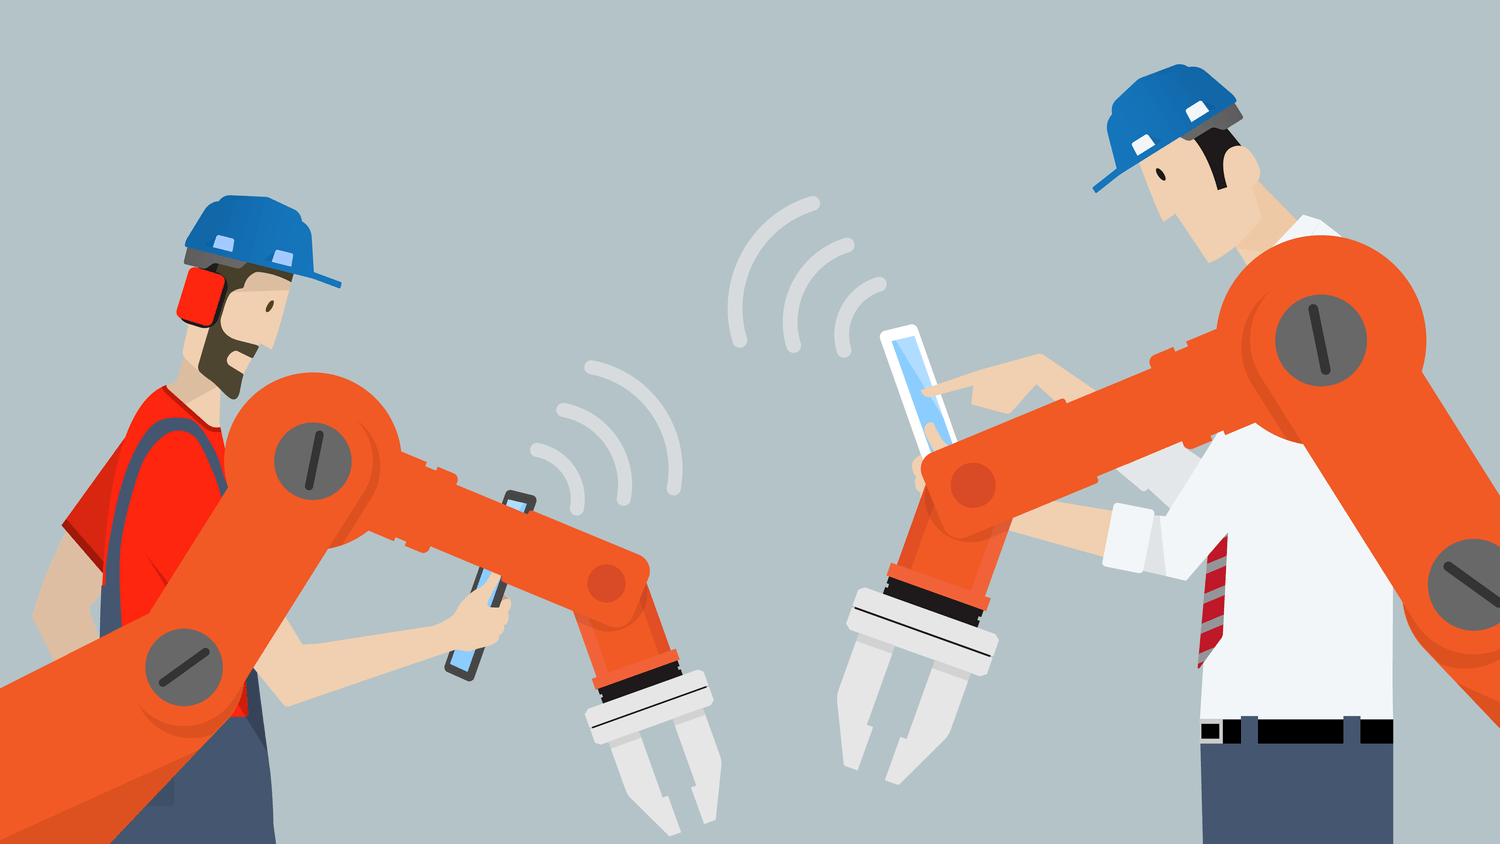 Illustration of plant operators working with Internet of Things manufacturing equipment.